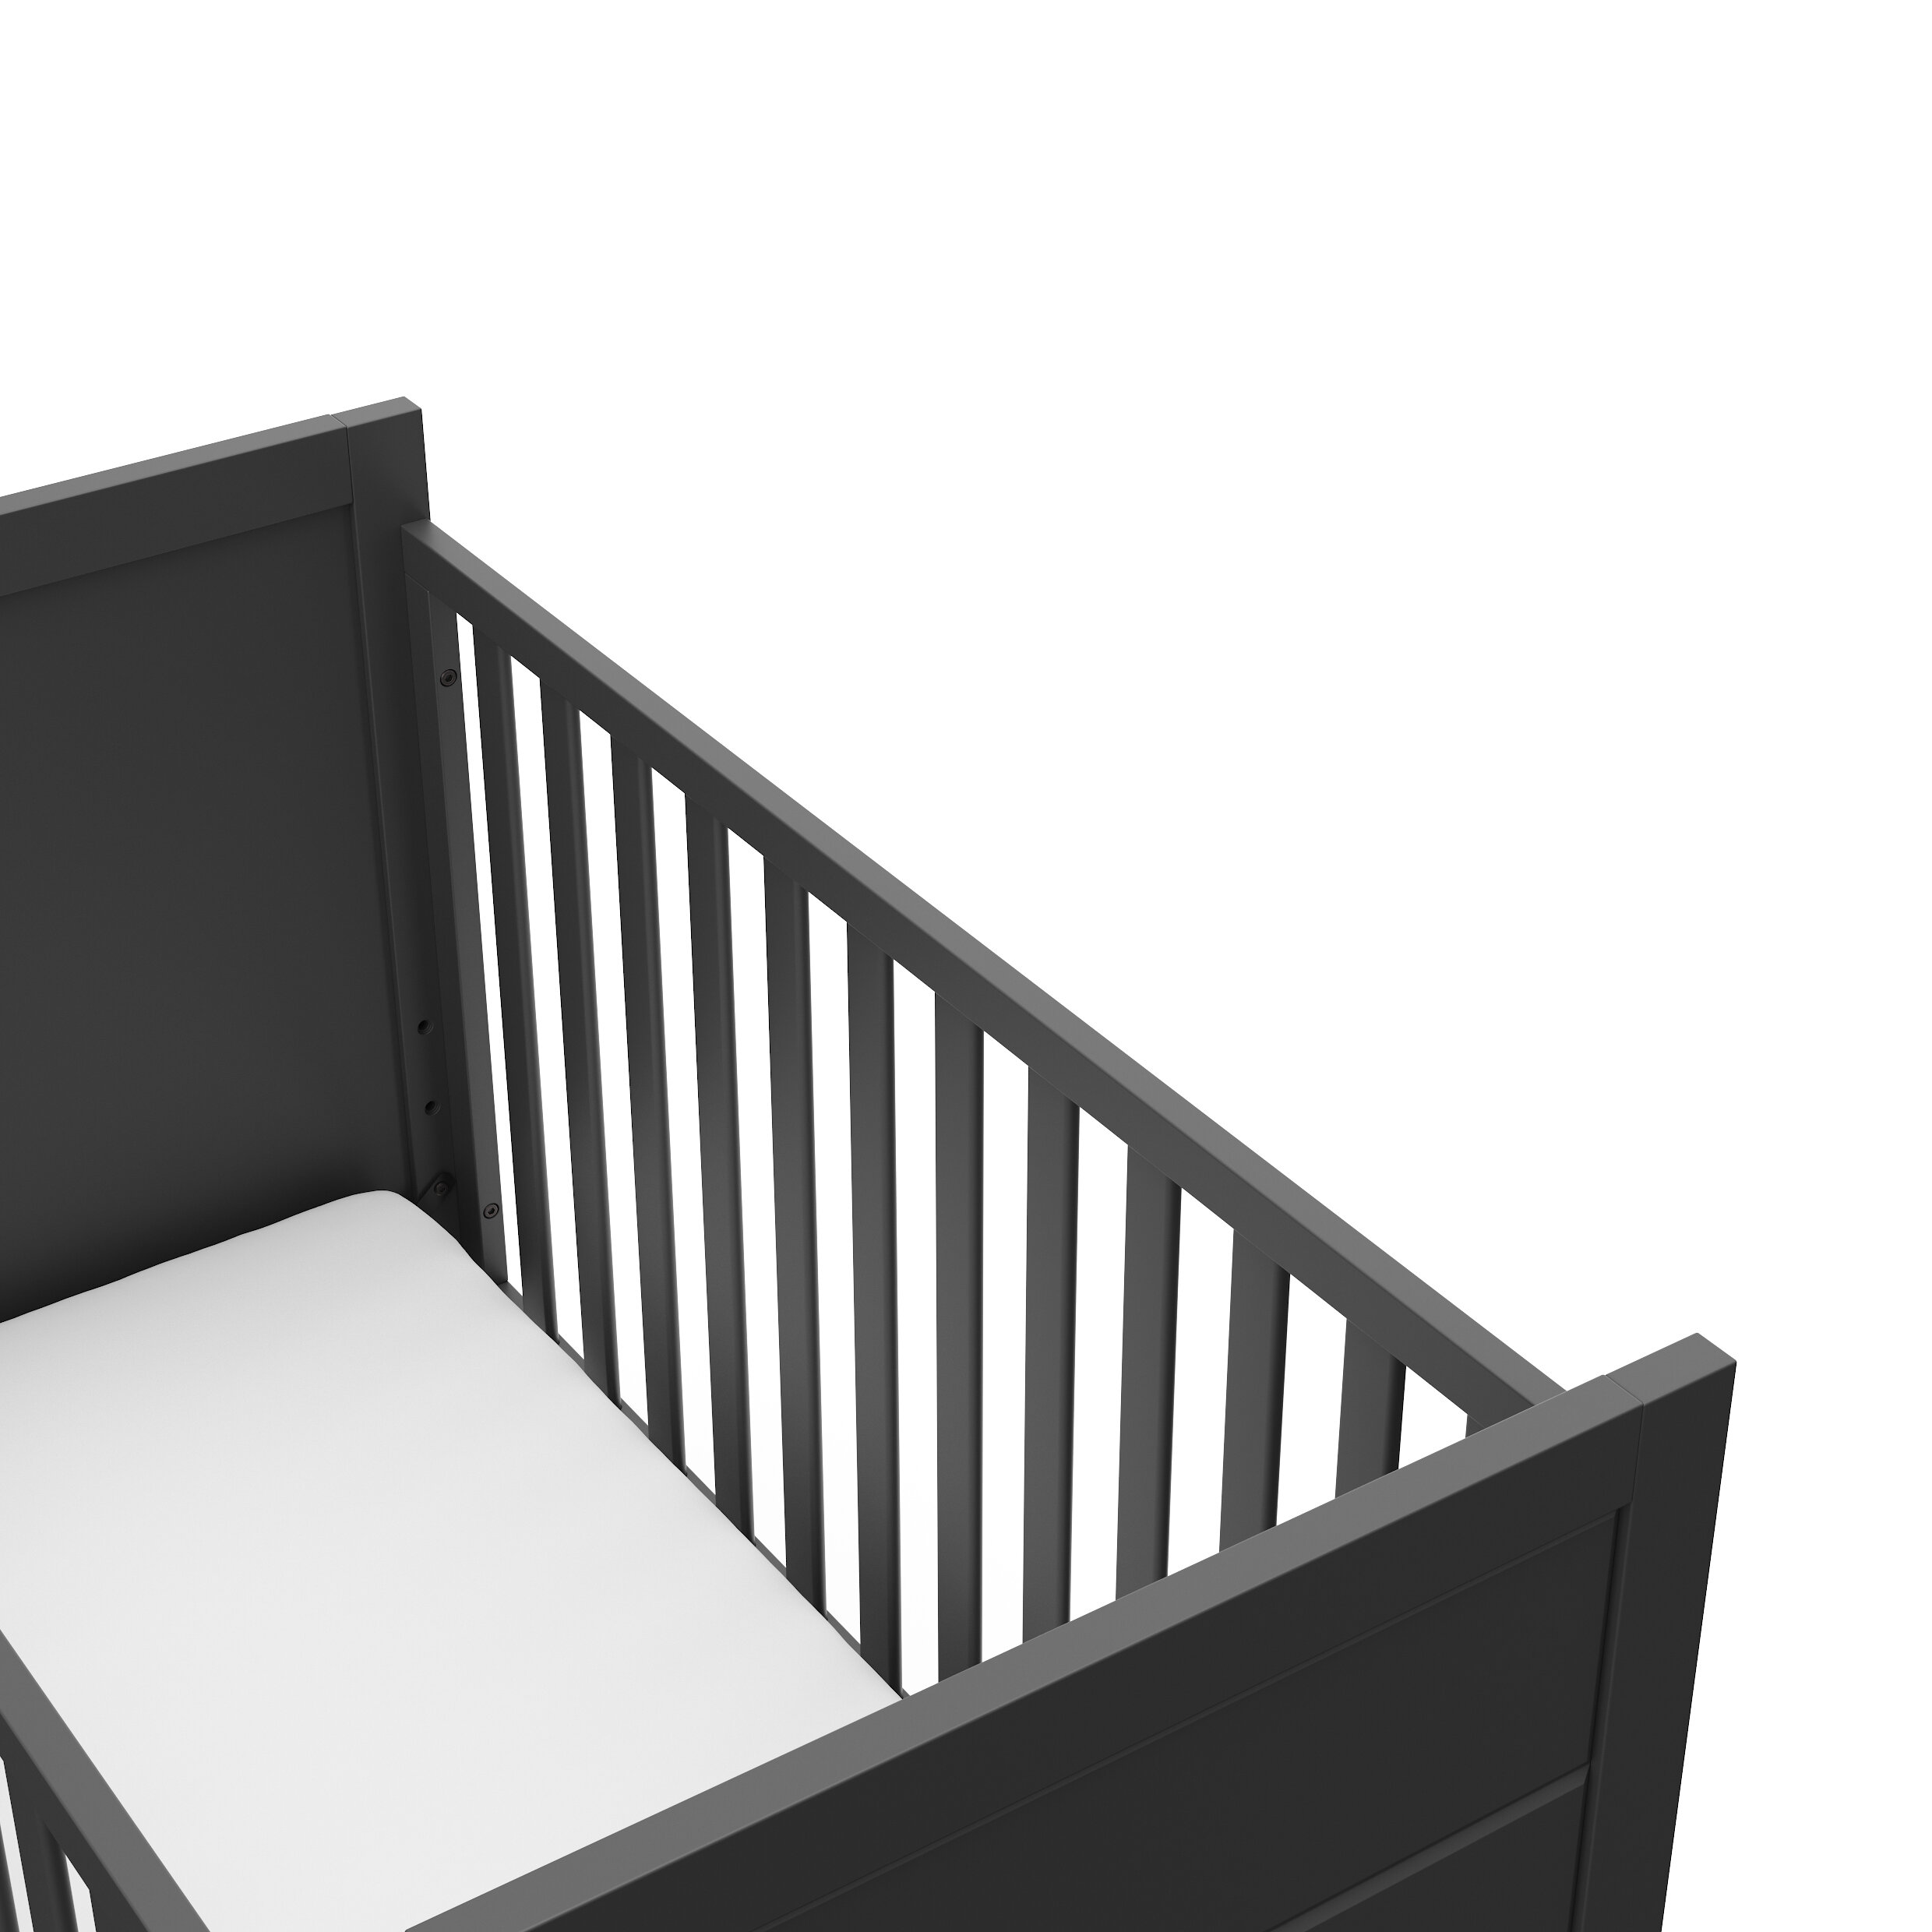 Storkcraft Nestling 3-in-1 Convertible Crib White Easily Converts to Toddler Bed and Daybed 3-Position Adjustable Mattress Support Base Planked End Panels for Transitional Style